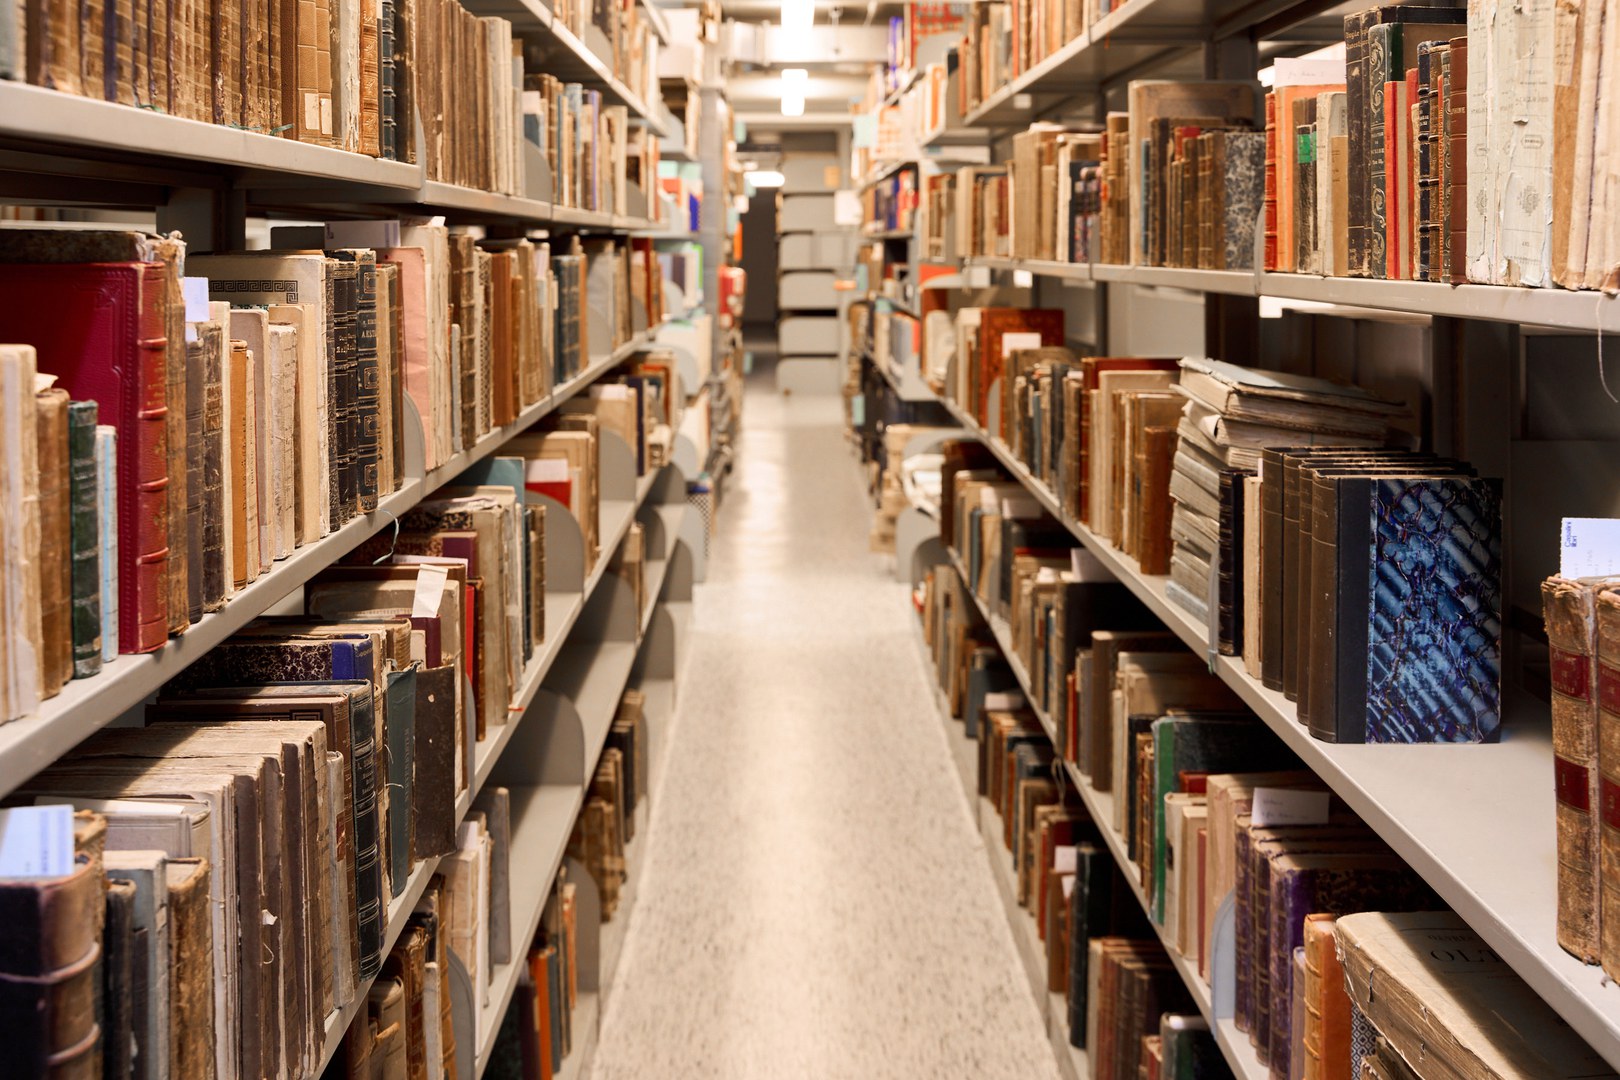 Several hundred shelf meters are taken up by the books in the basement of the ULB